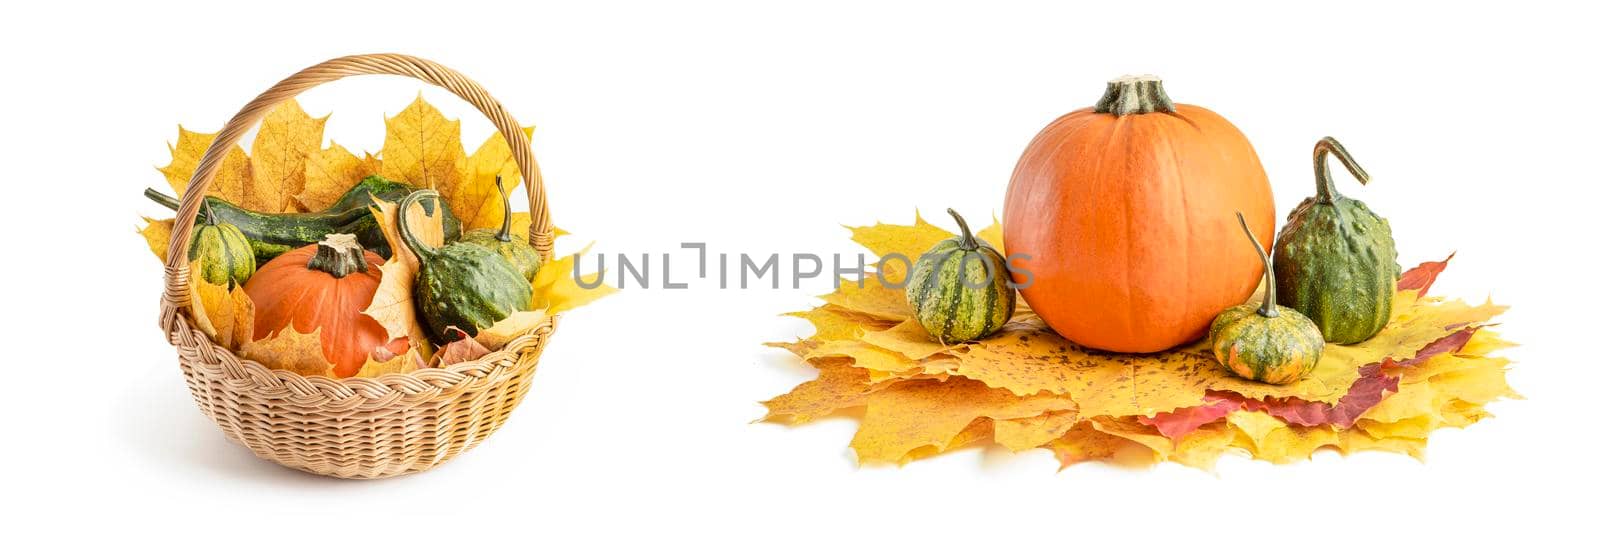 A large set of small pumpkins and pumpkin in a wicker basket, for Halloween decoration. Isolate on white background. Autumn set of decorative pumpkins and maple leaves